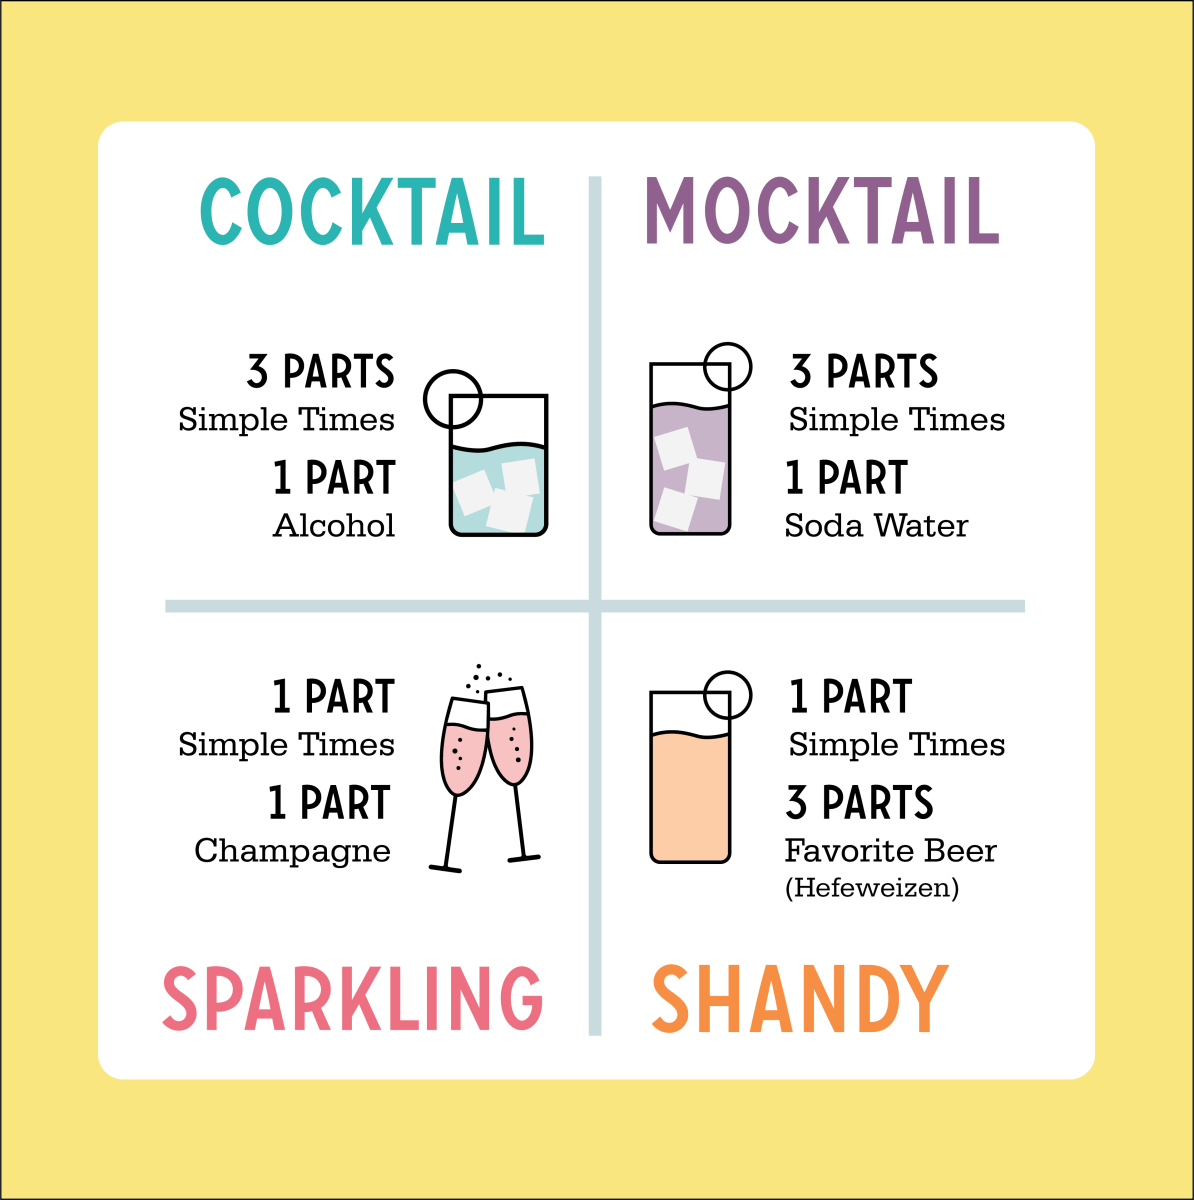 Cocktail Mixers - Alcohol Mixers - Simple Times Mixers - Cucumber Mint Limeade